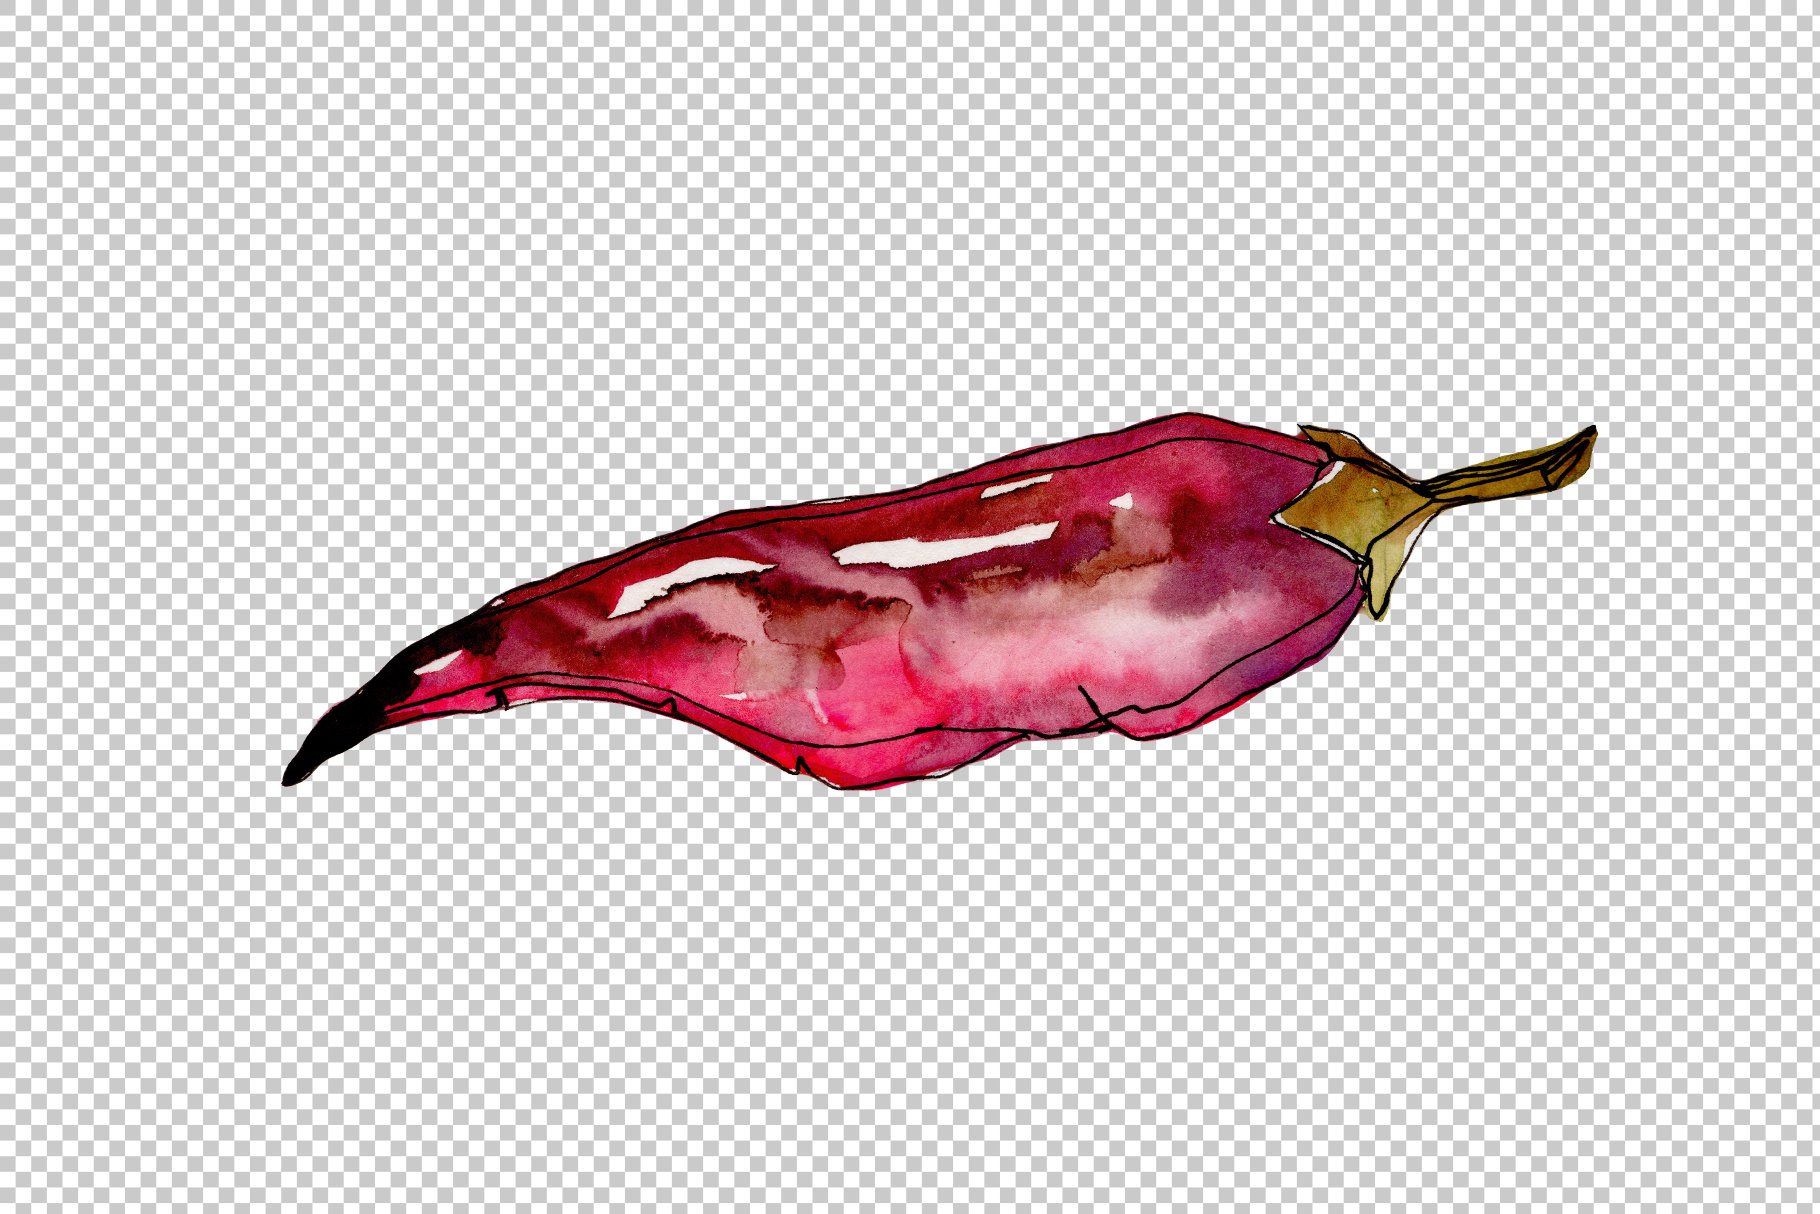 Watercolor red chili pepper on a transparent background.